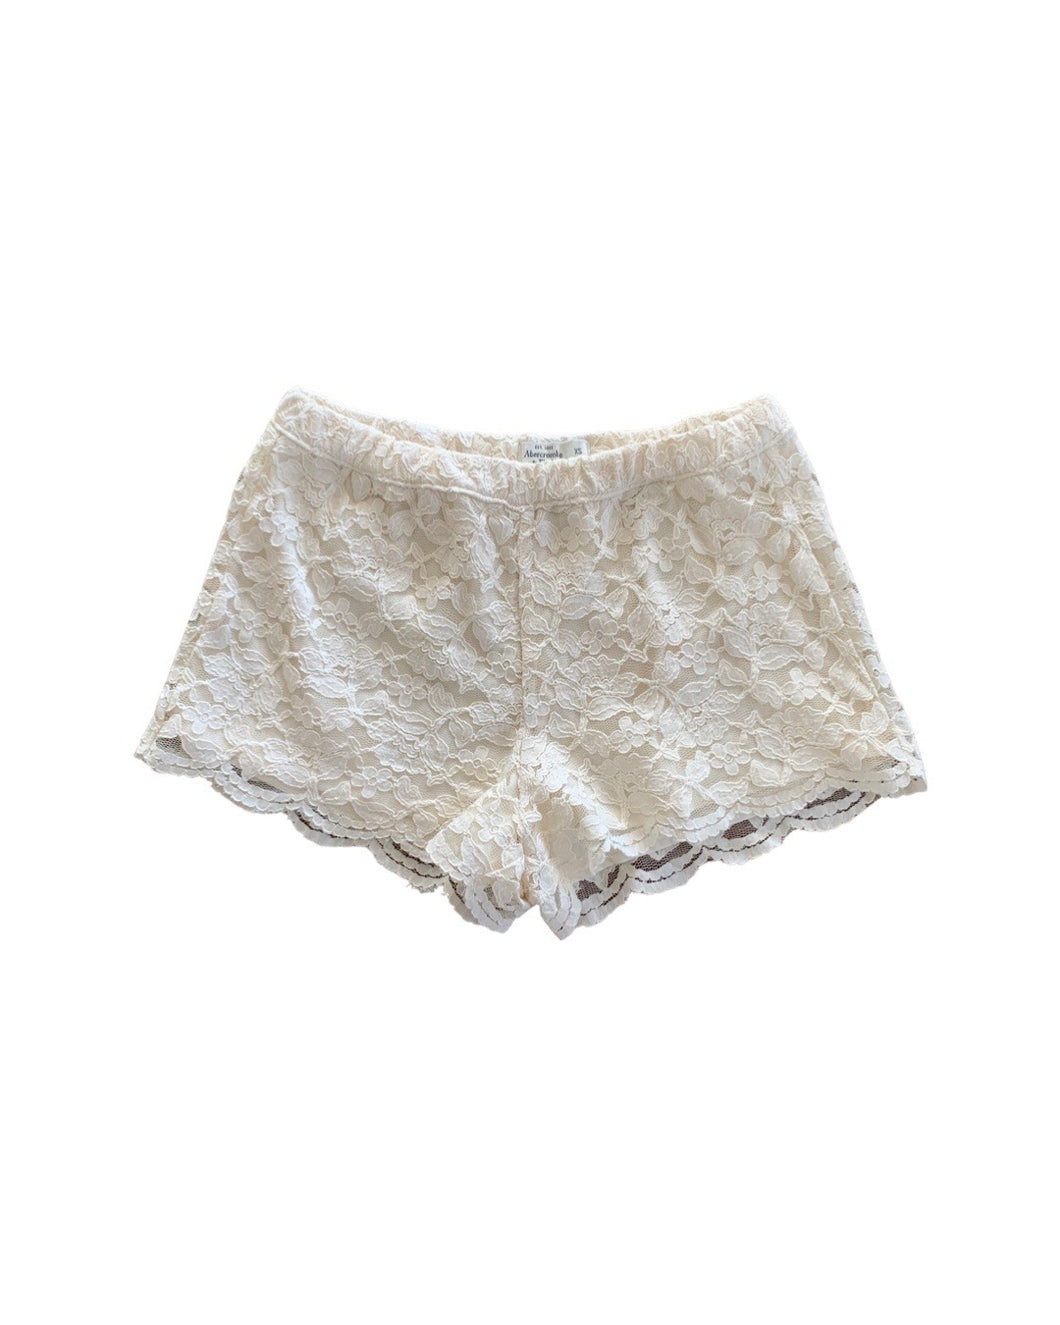 ABERCROMBIE & FITCH Size XS Floral Cream Shorts SEP6421